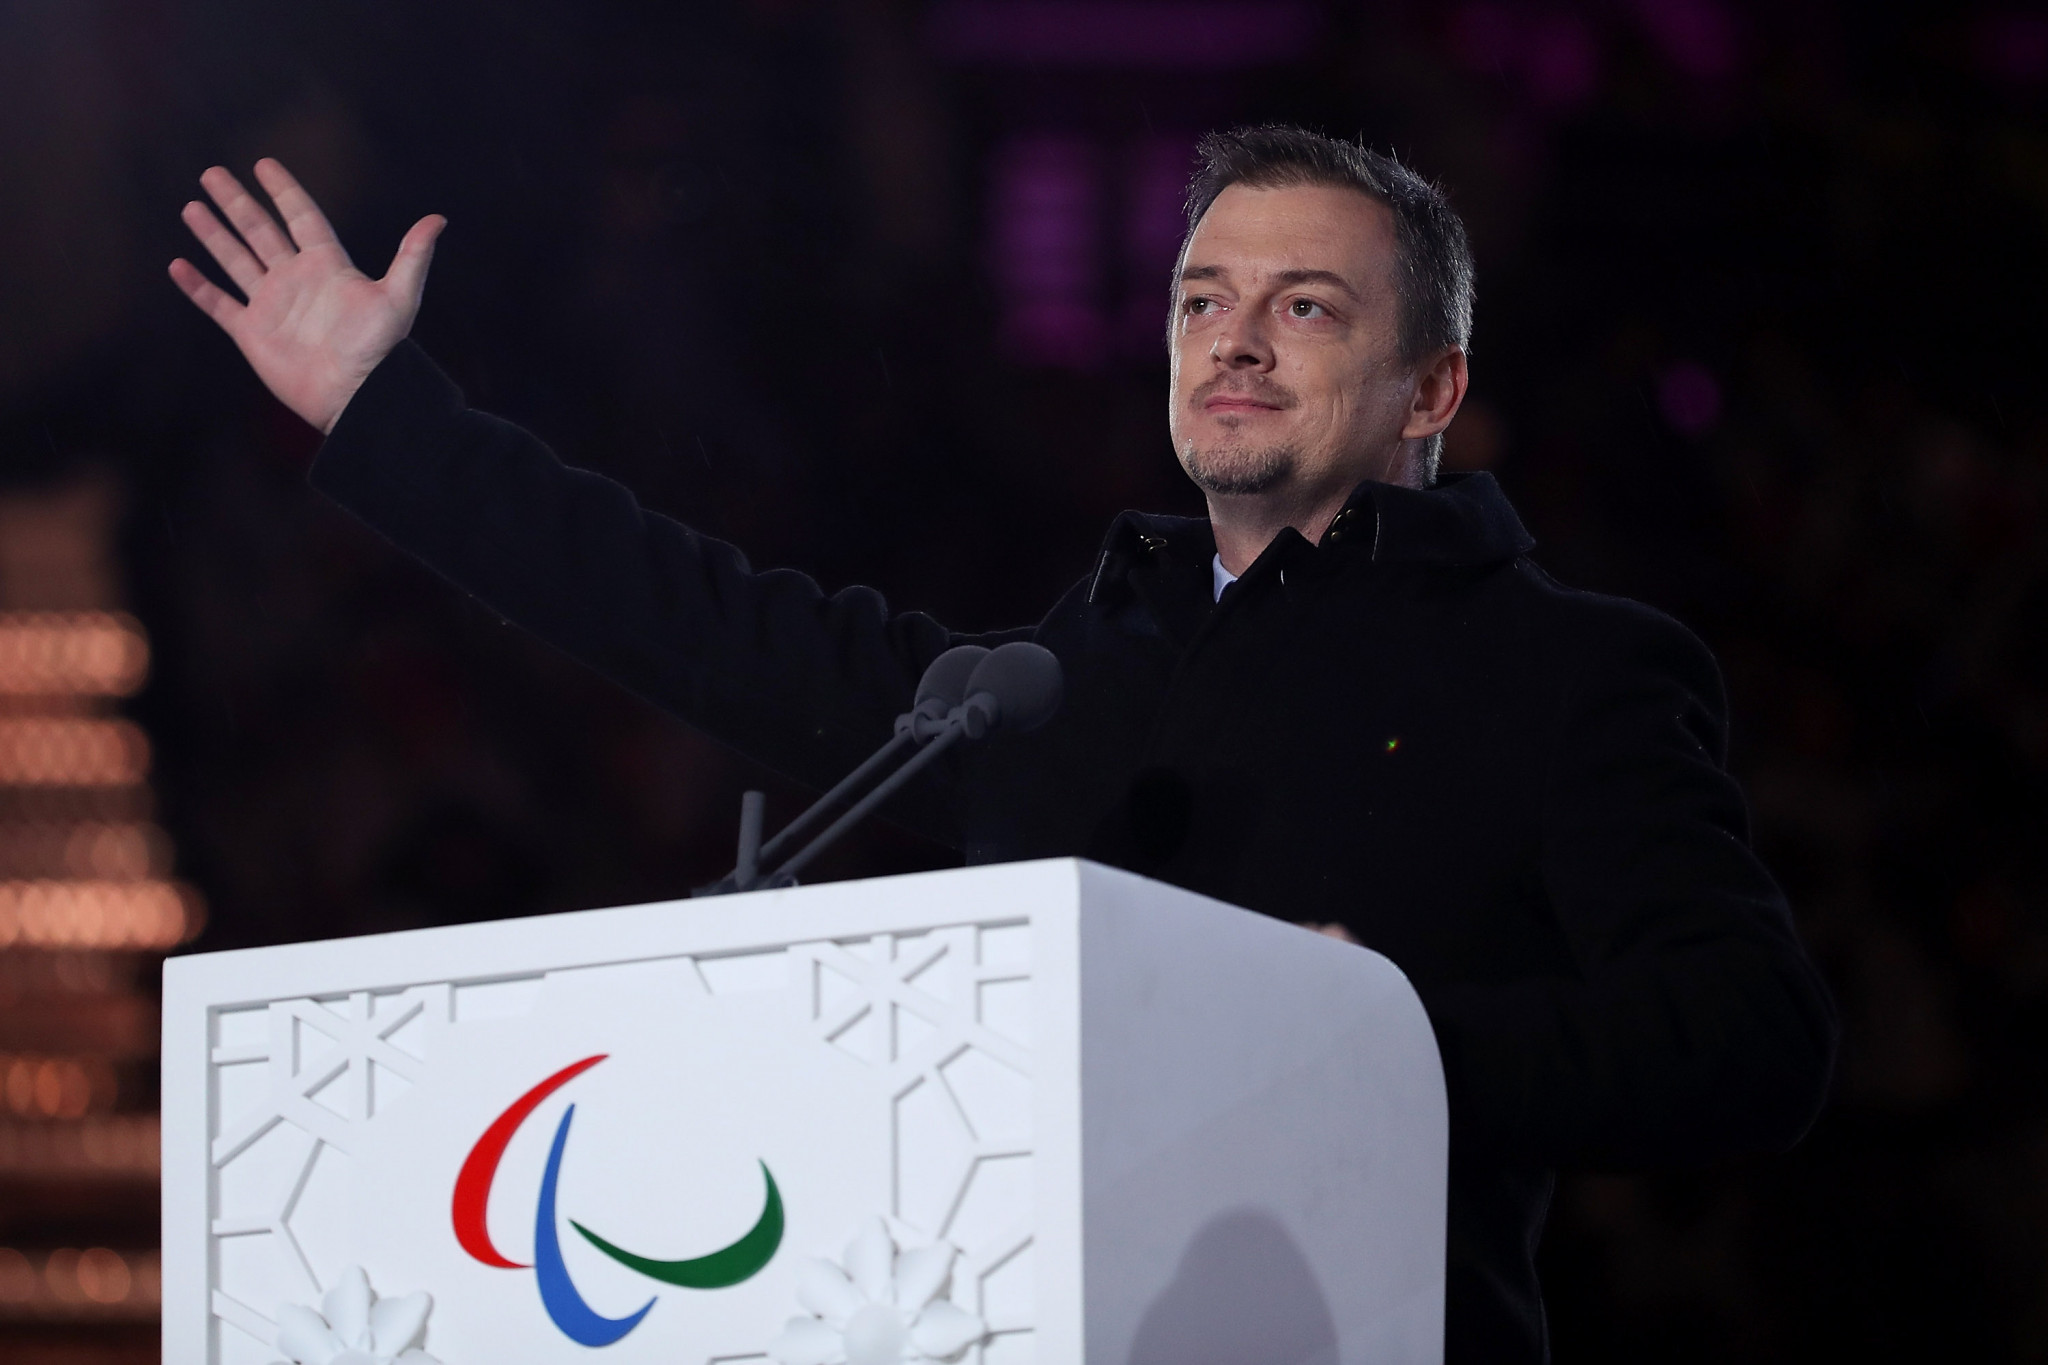 The International Paralympic Committee President Andrew Parsons had already been confirmed as delivering opening remarks at the 2021 Inclusion Summit ©Getty Images